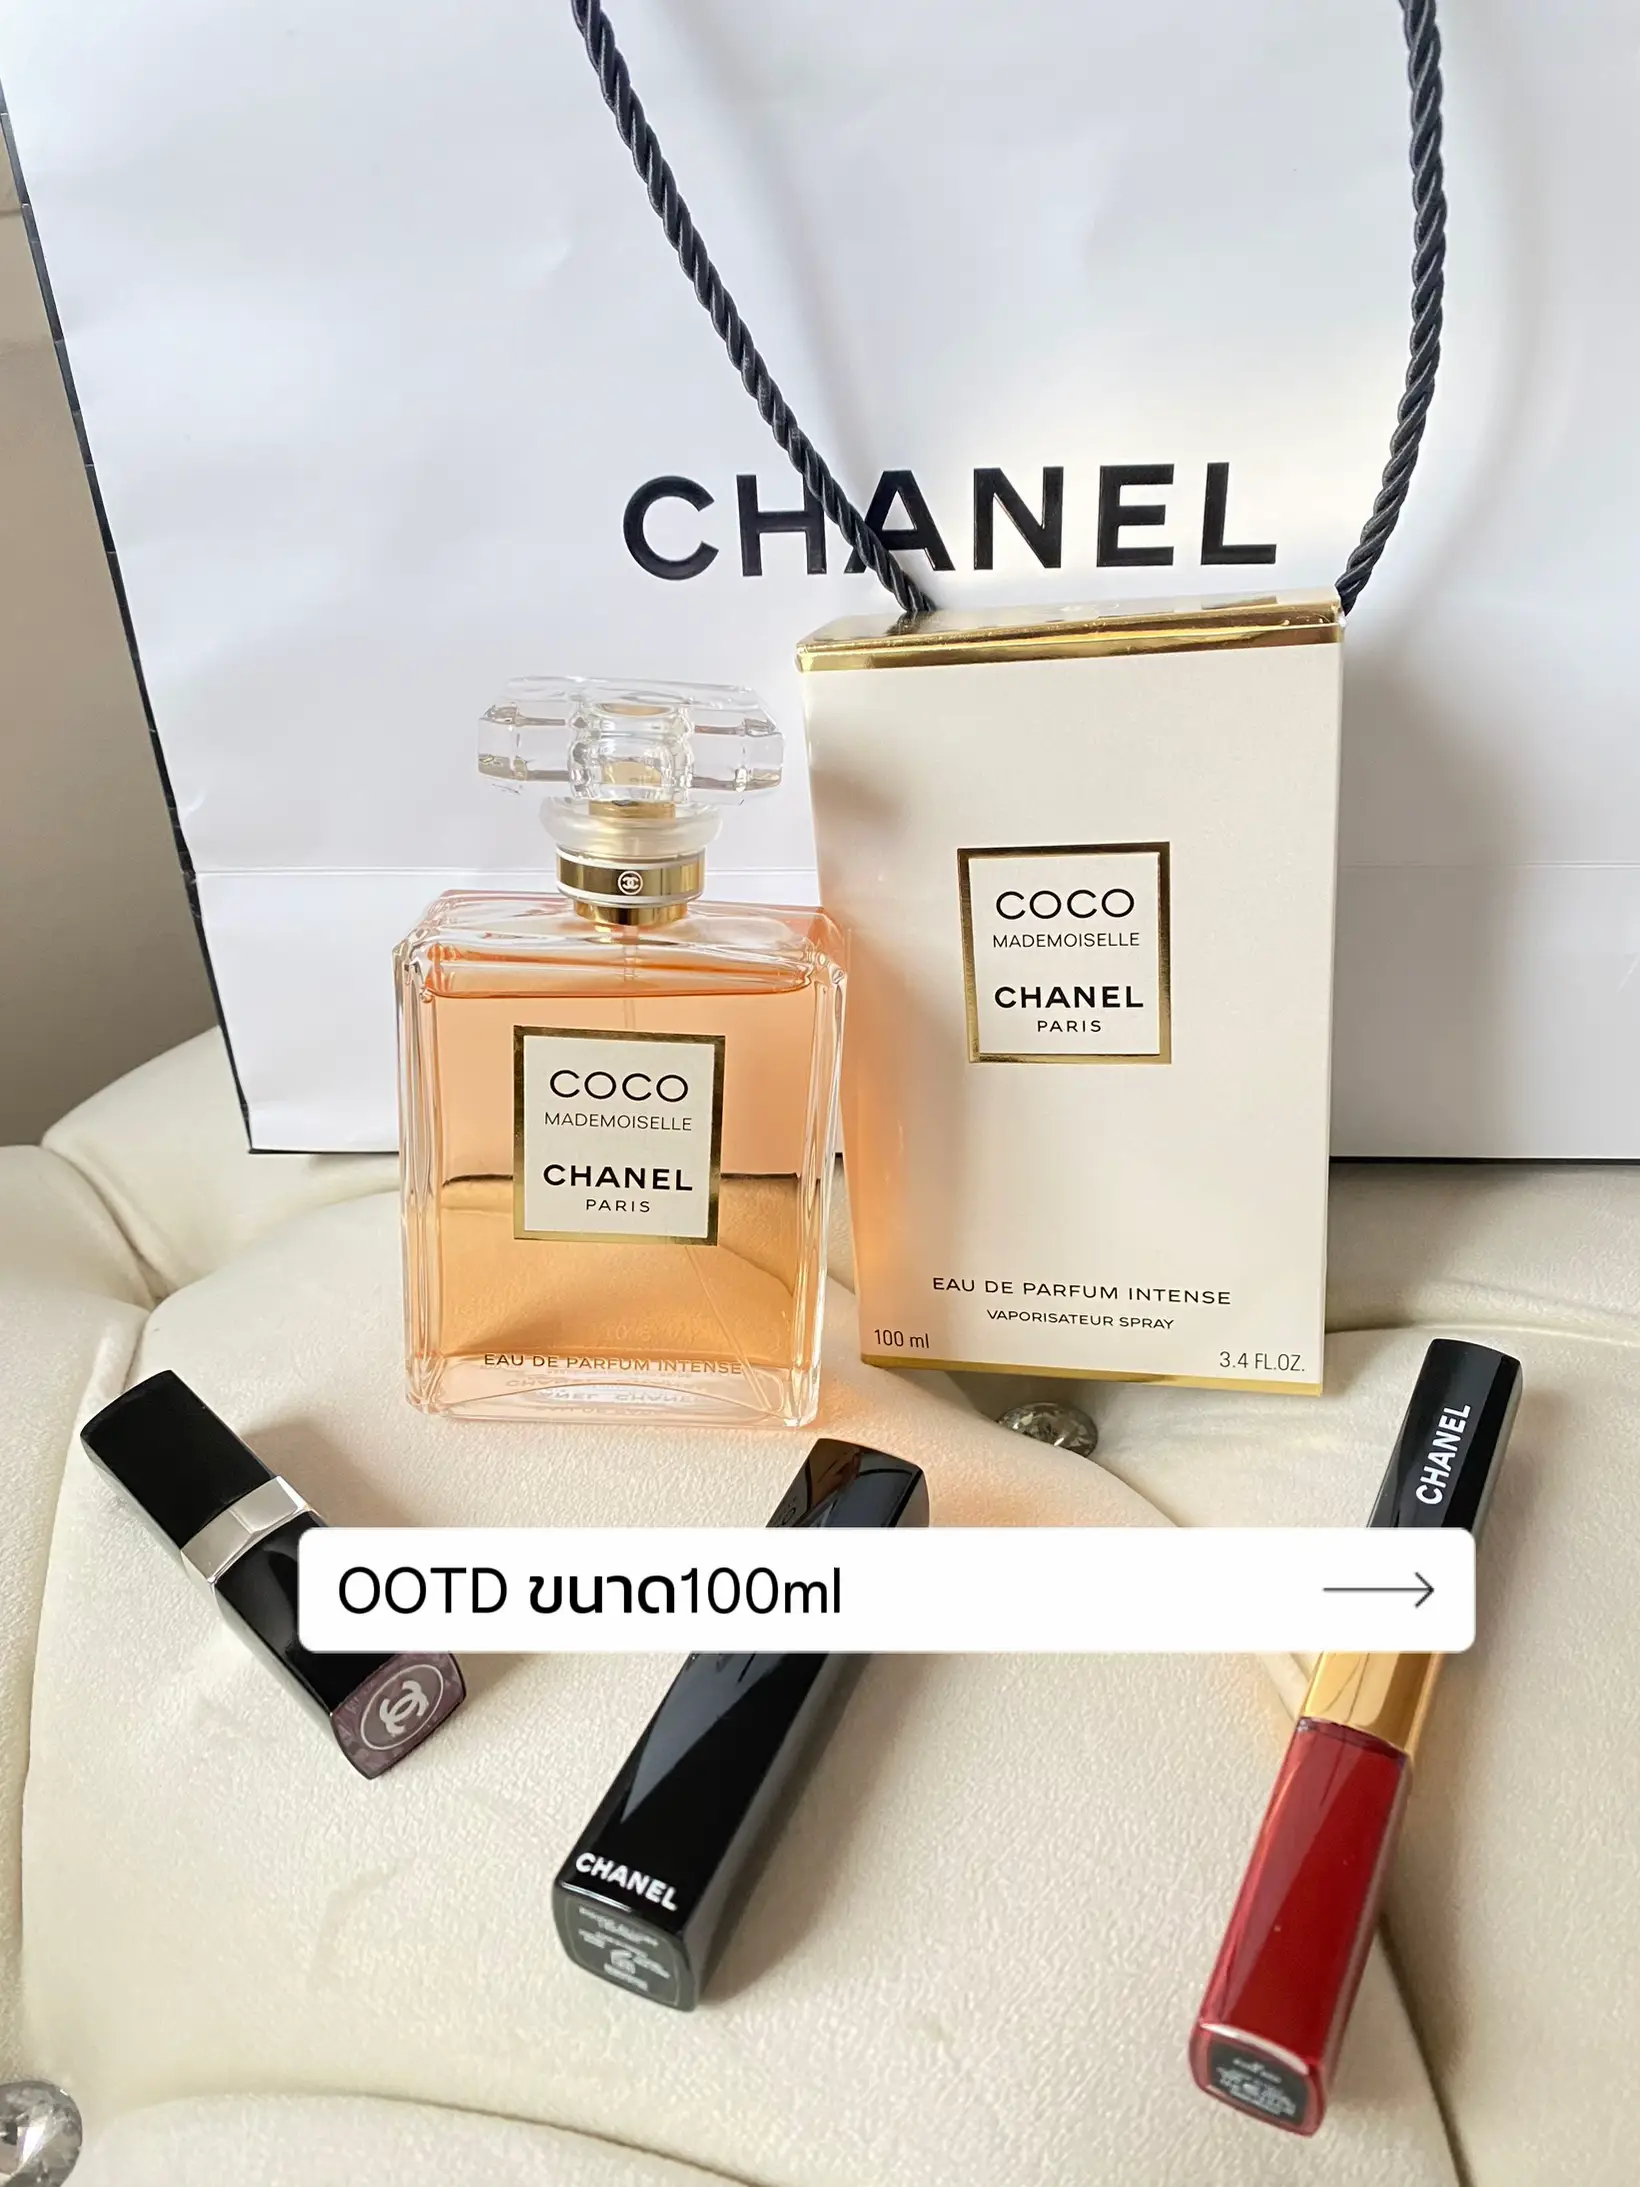 CHANEL COCO MADEMOISELLE INTENSE EDP 100ml - The Perfumes Gallery